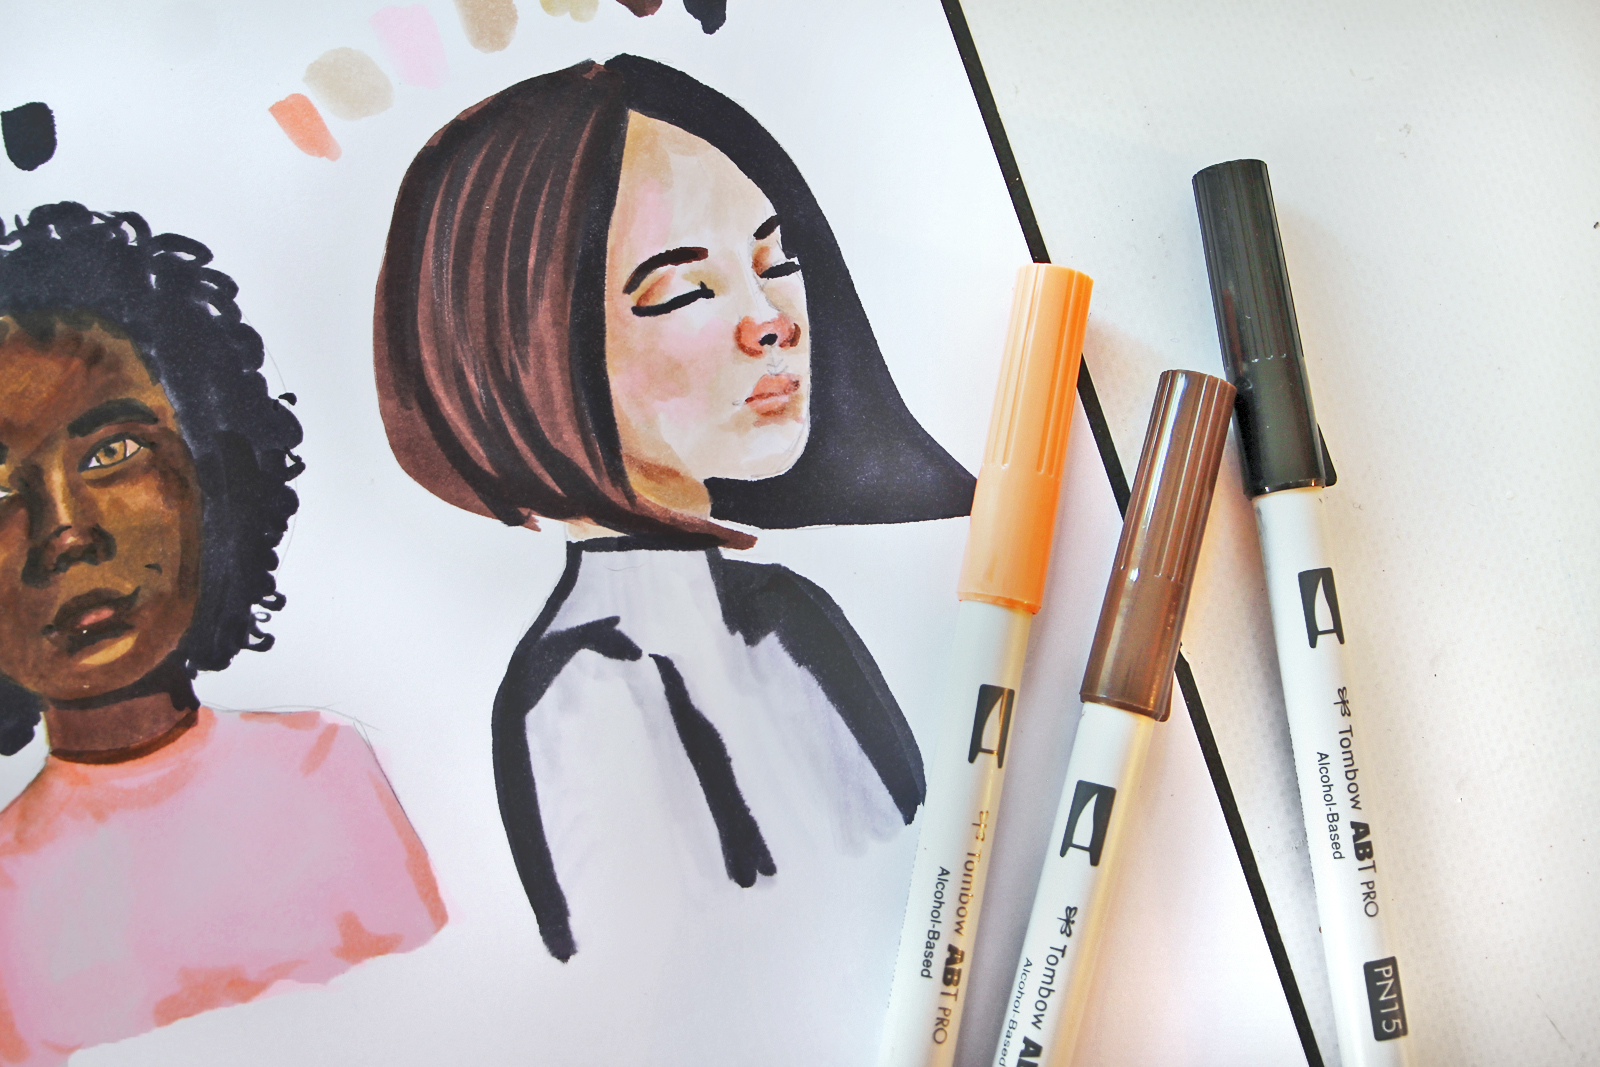 How To Color Skin with Alcohol Markers, Skin Tutorial